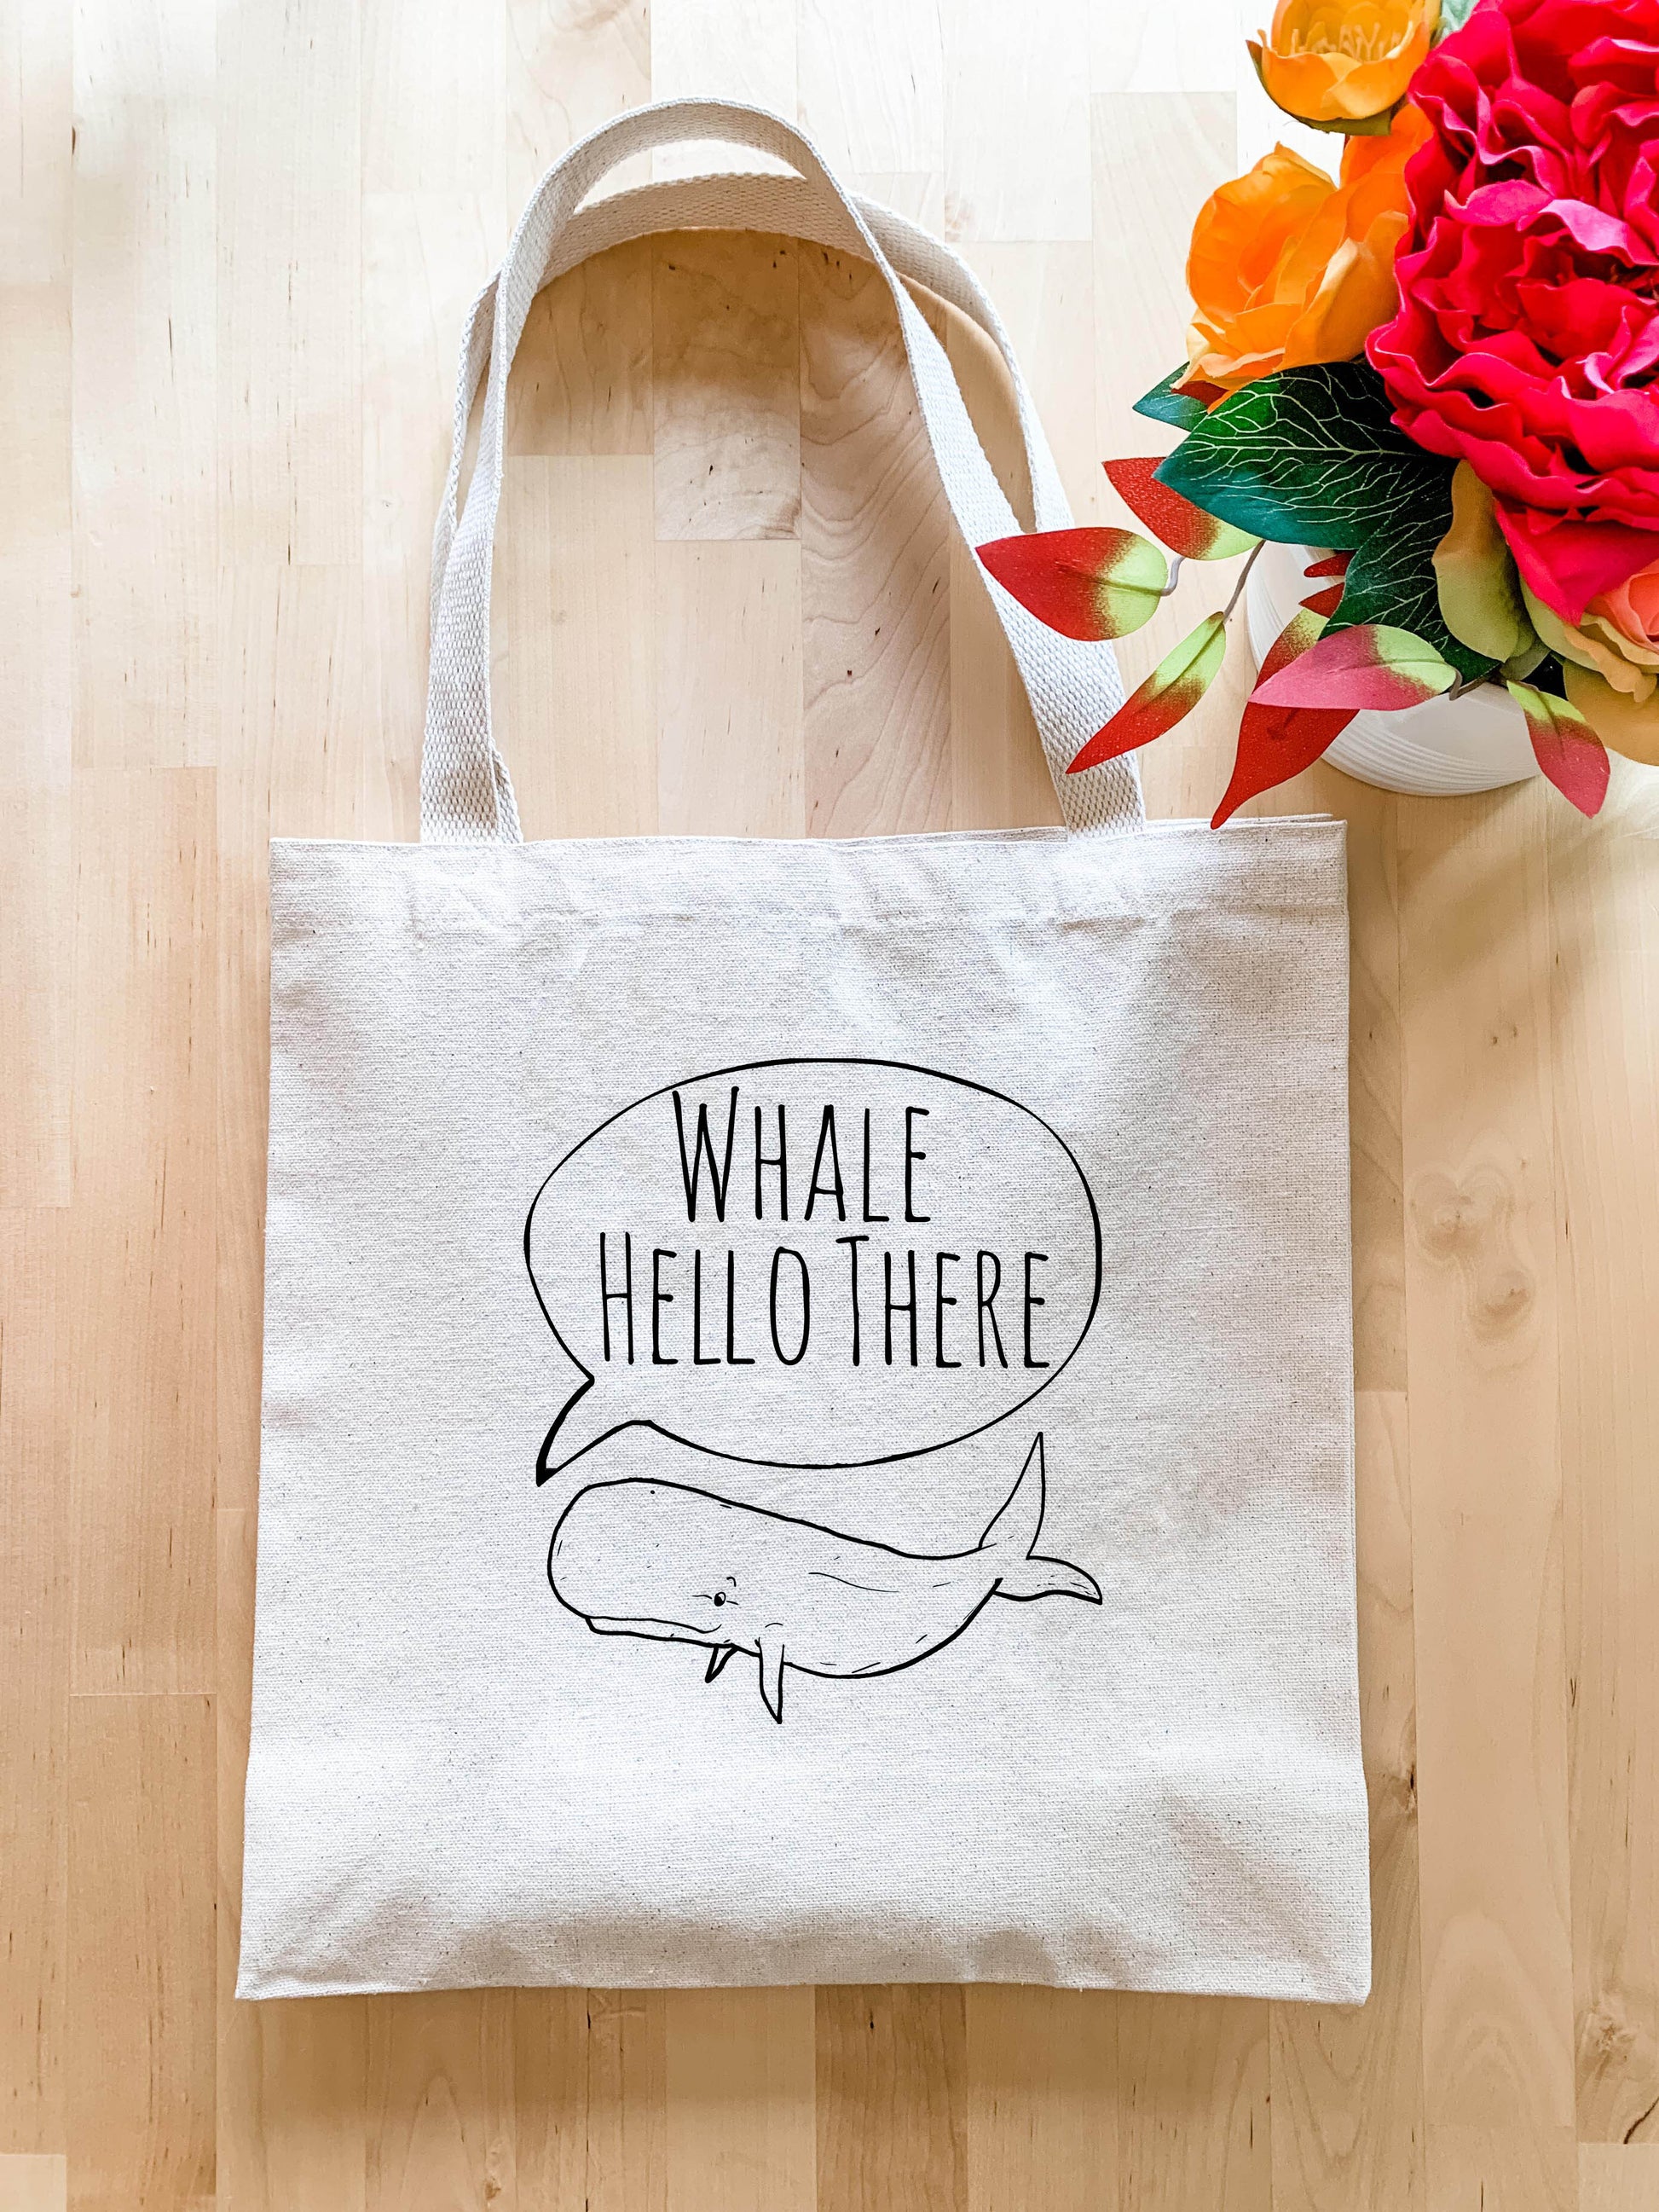 Whale Hello There - Tote Bag - MoonlightMakers